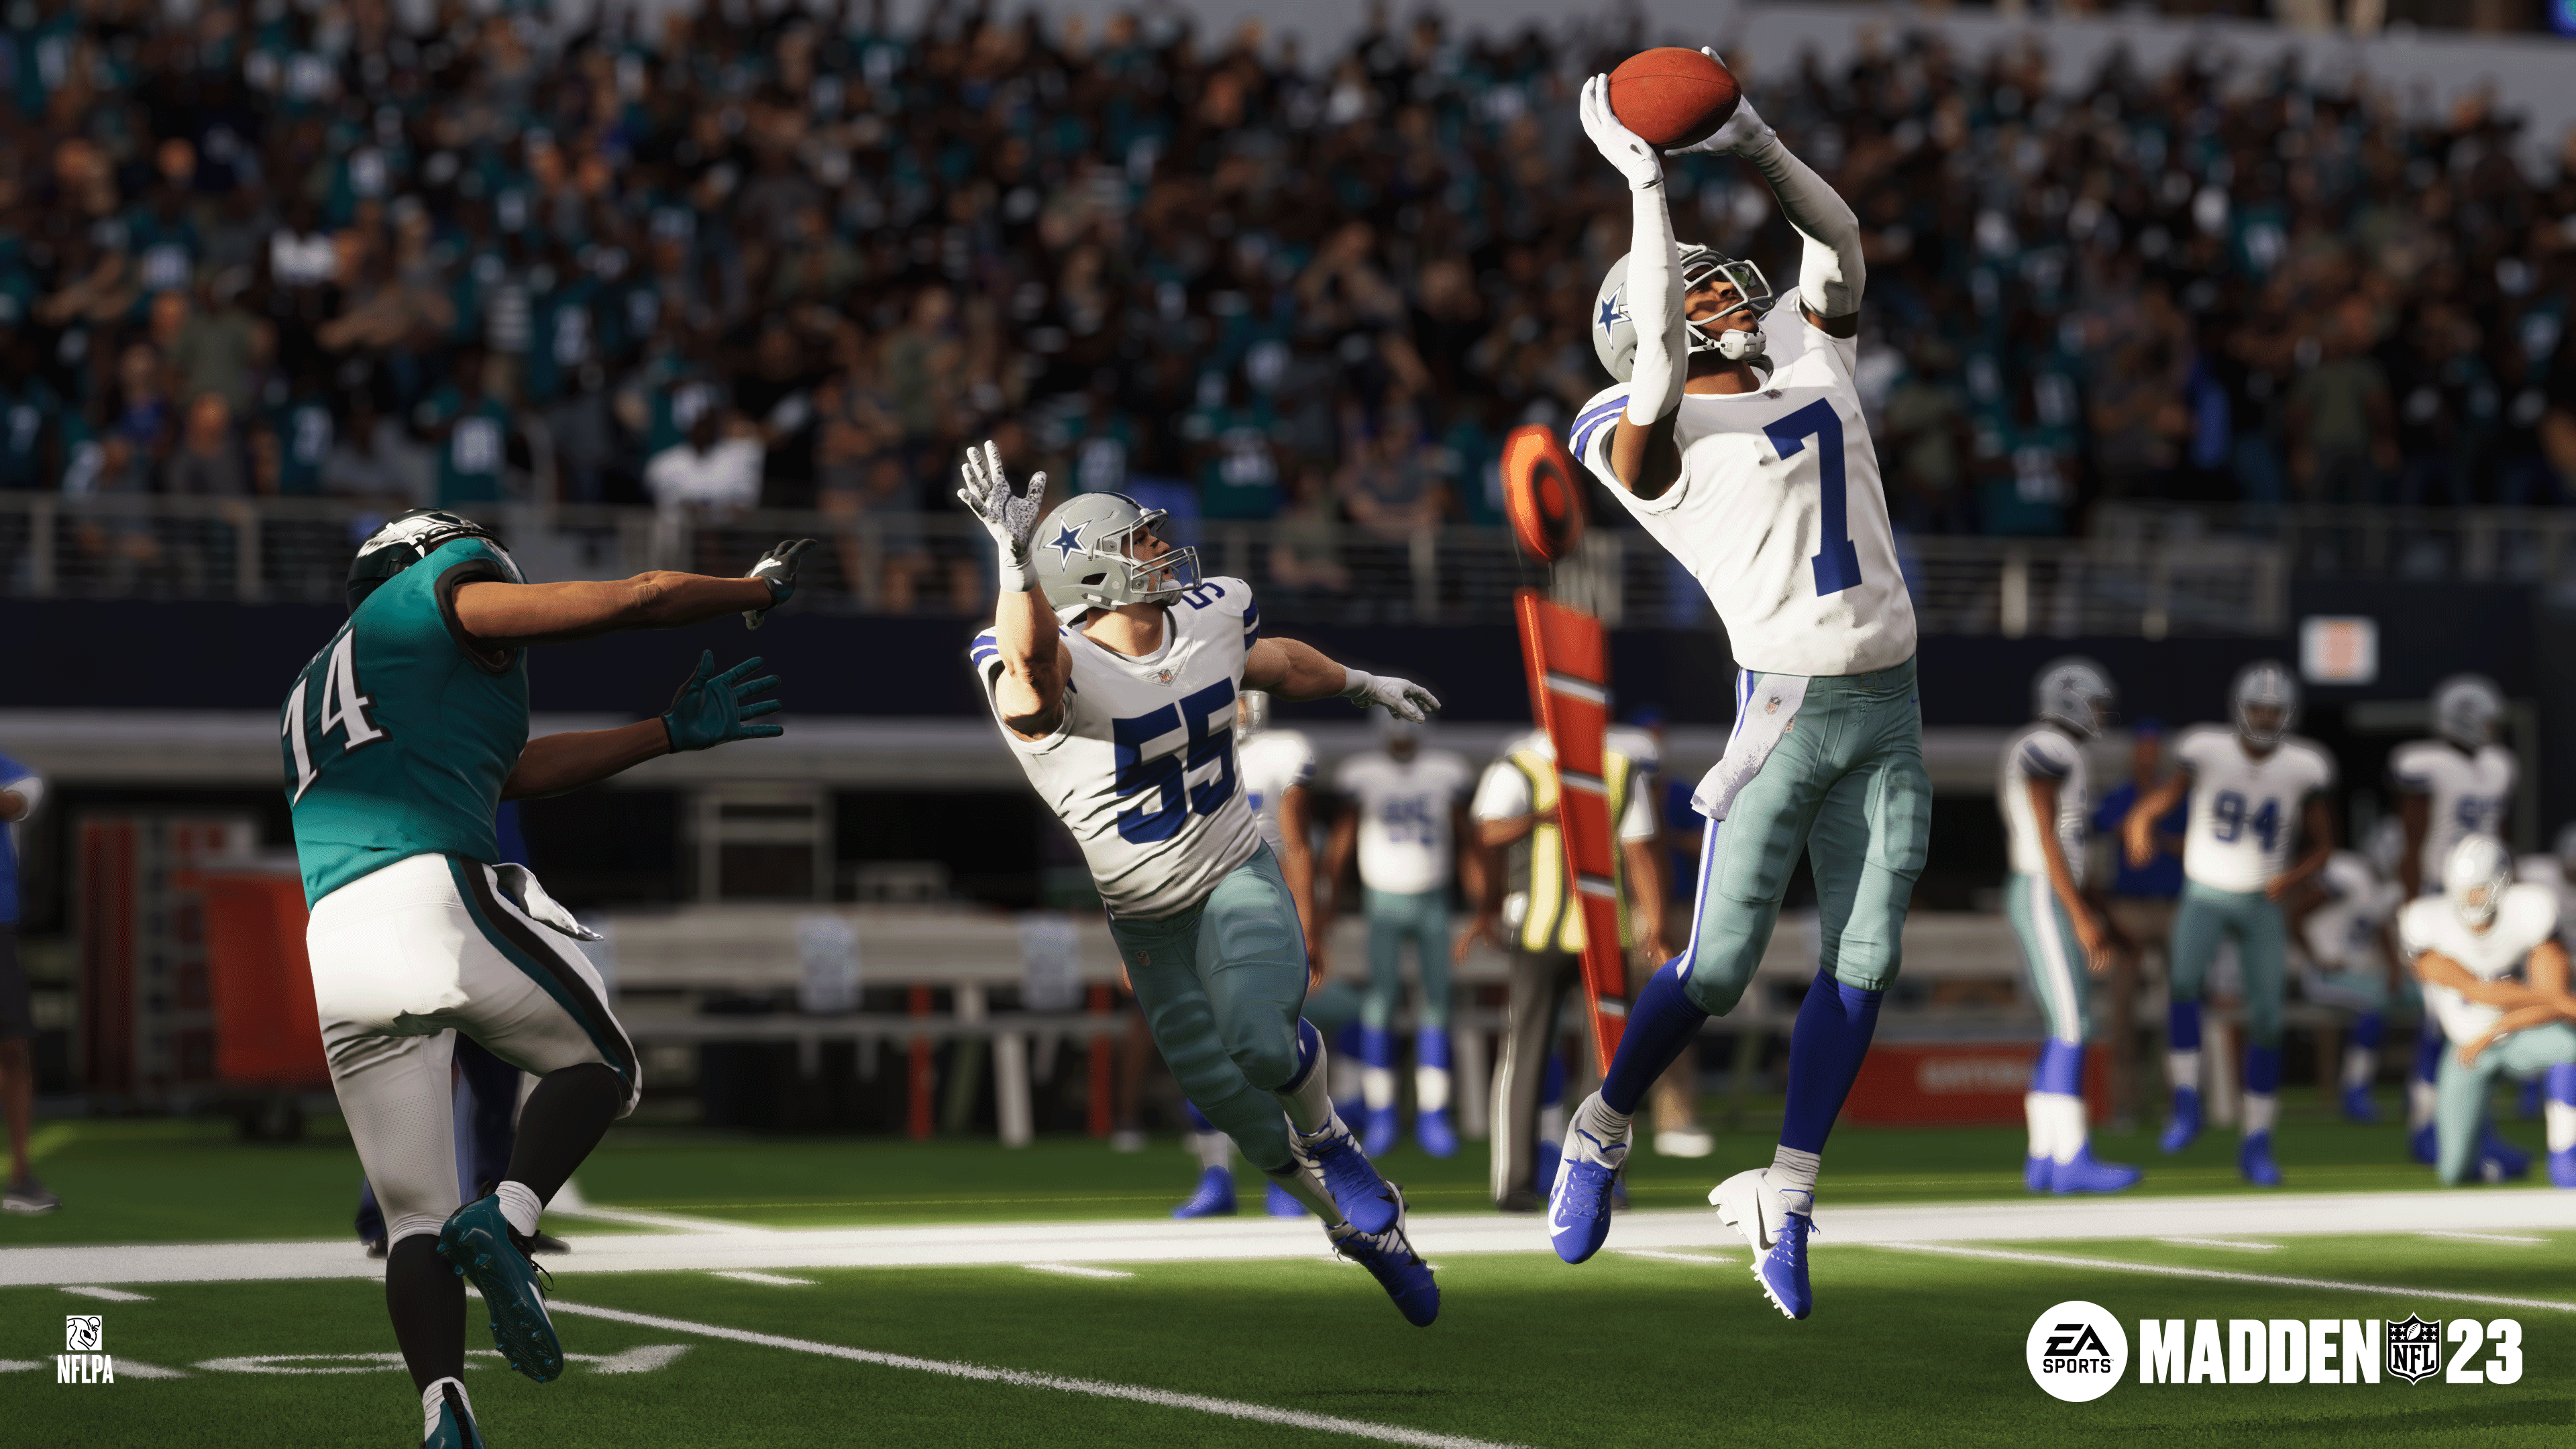 Madden NFL 23 HD Wallpaper and Background